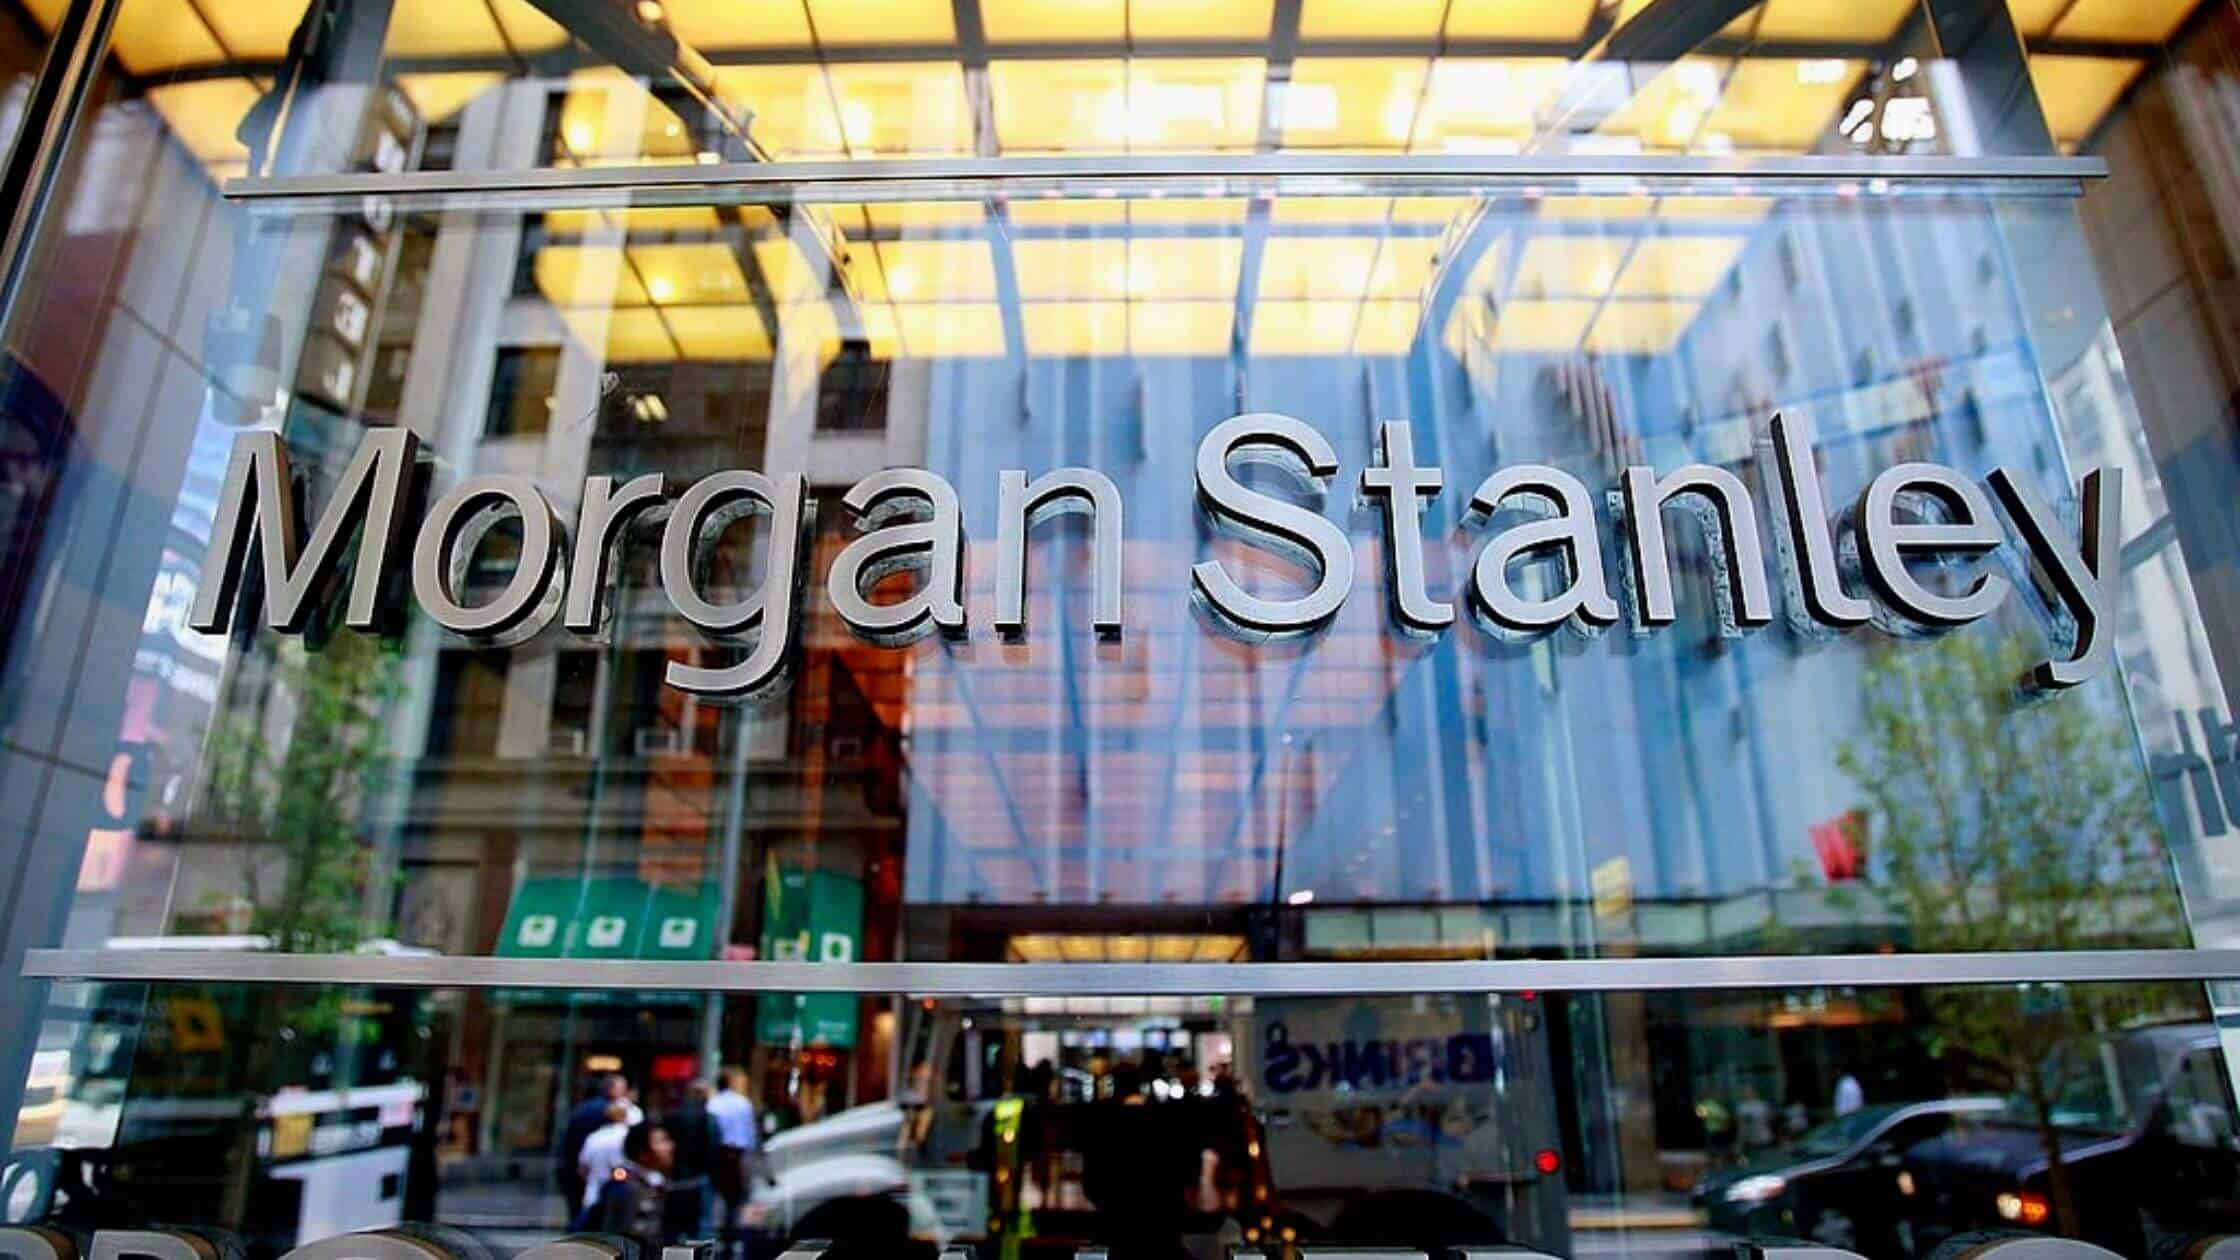 Two Equity Bankers Have Their Morgan Stanley Broker Licenses Revoked